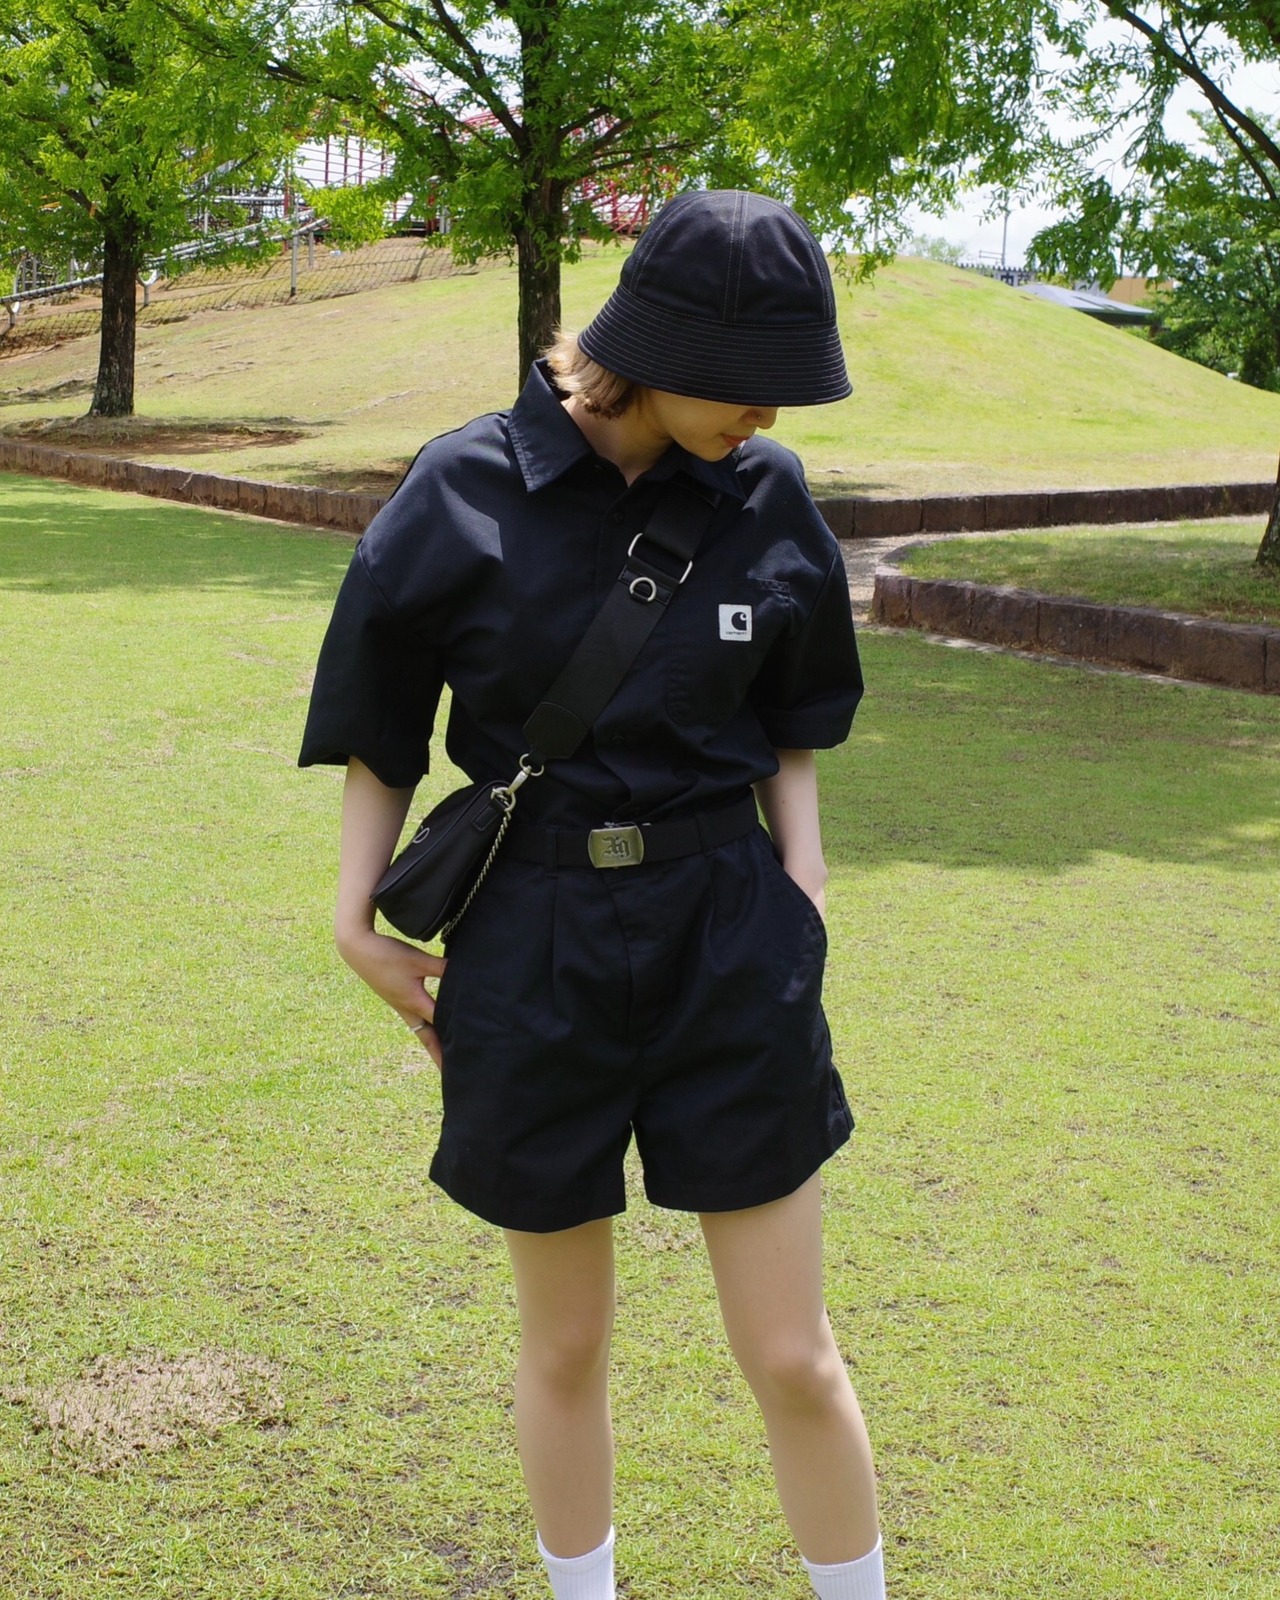 【Carhartt WIP】W CRAFT SHORT COVERALL【カーハートダブルアイピー】